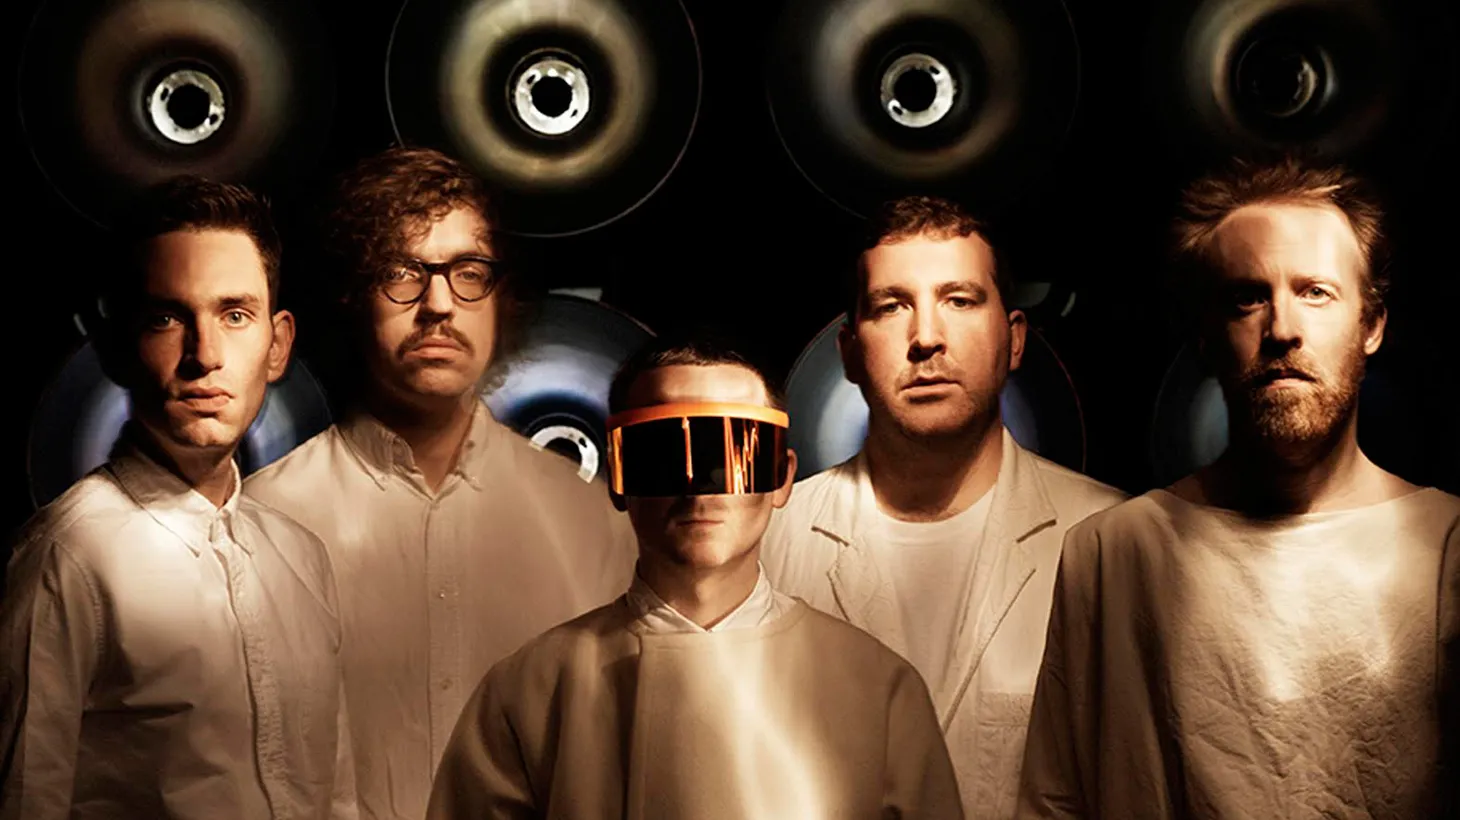 Longtime KCRW favorite Hot Chip returns to share songs from its latest album, Why Make Sense?